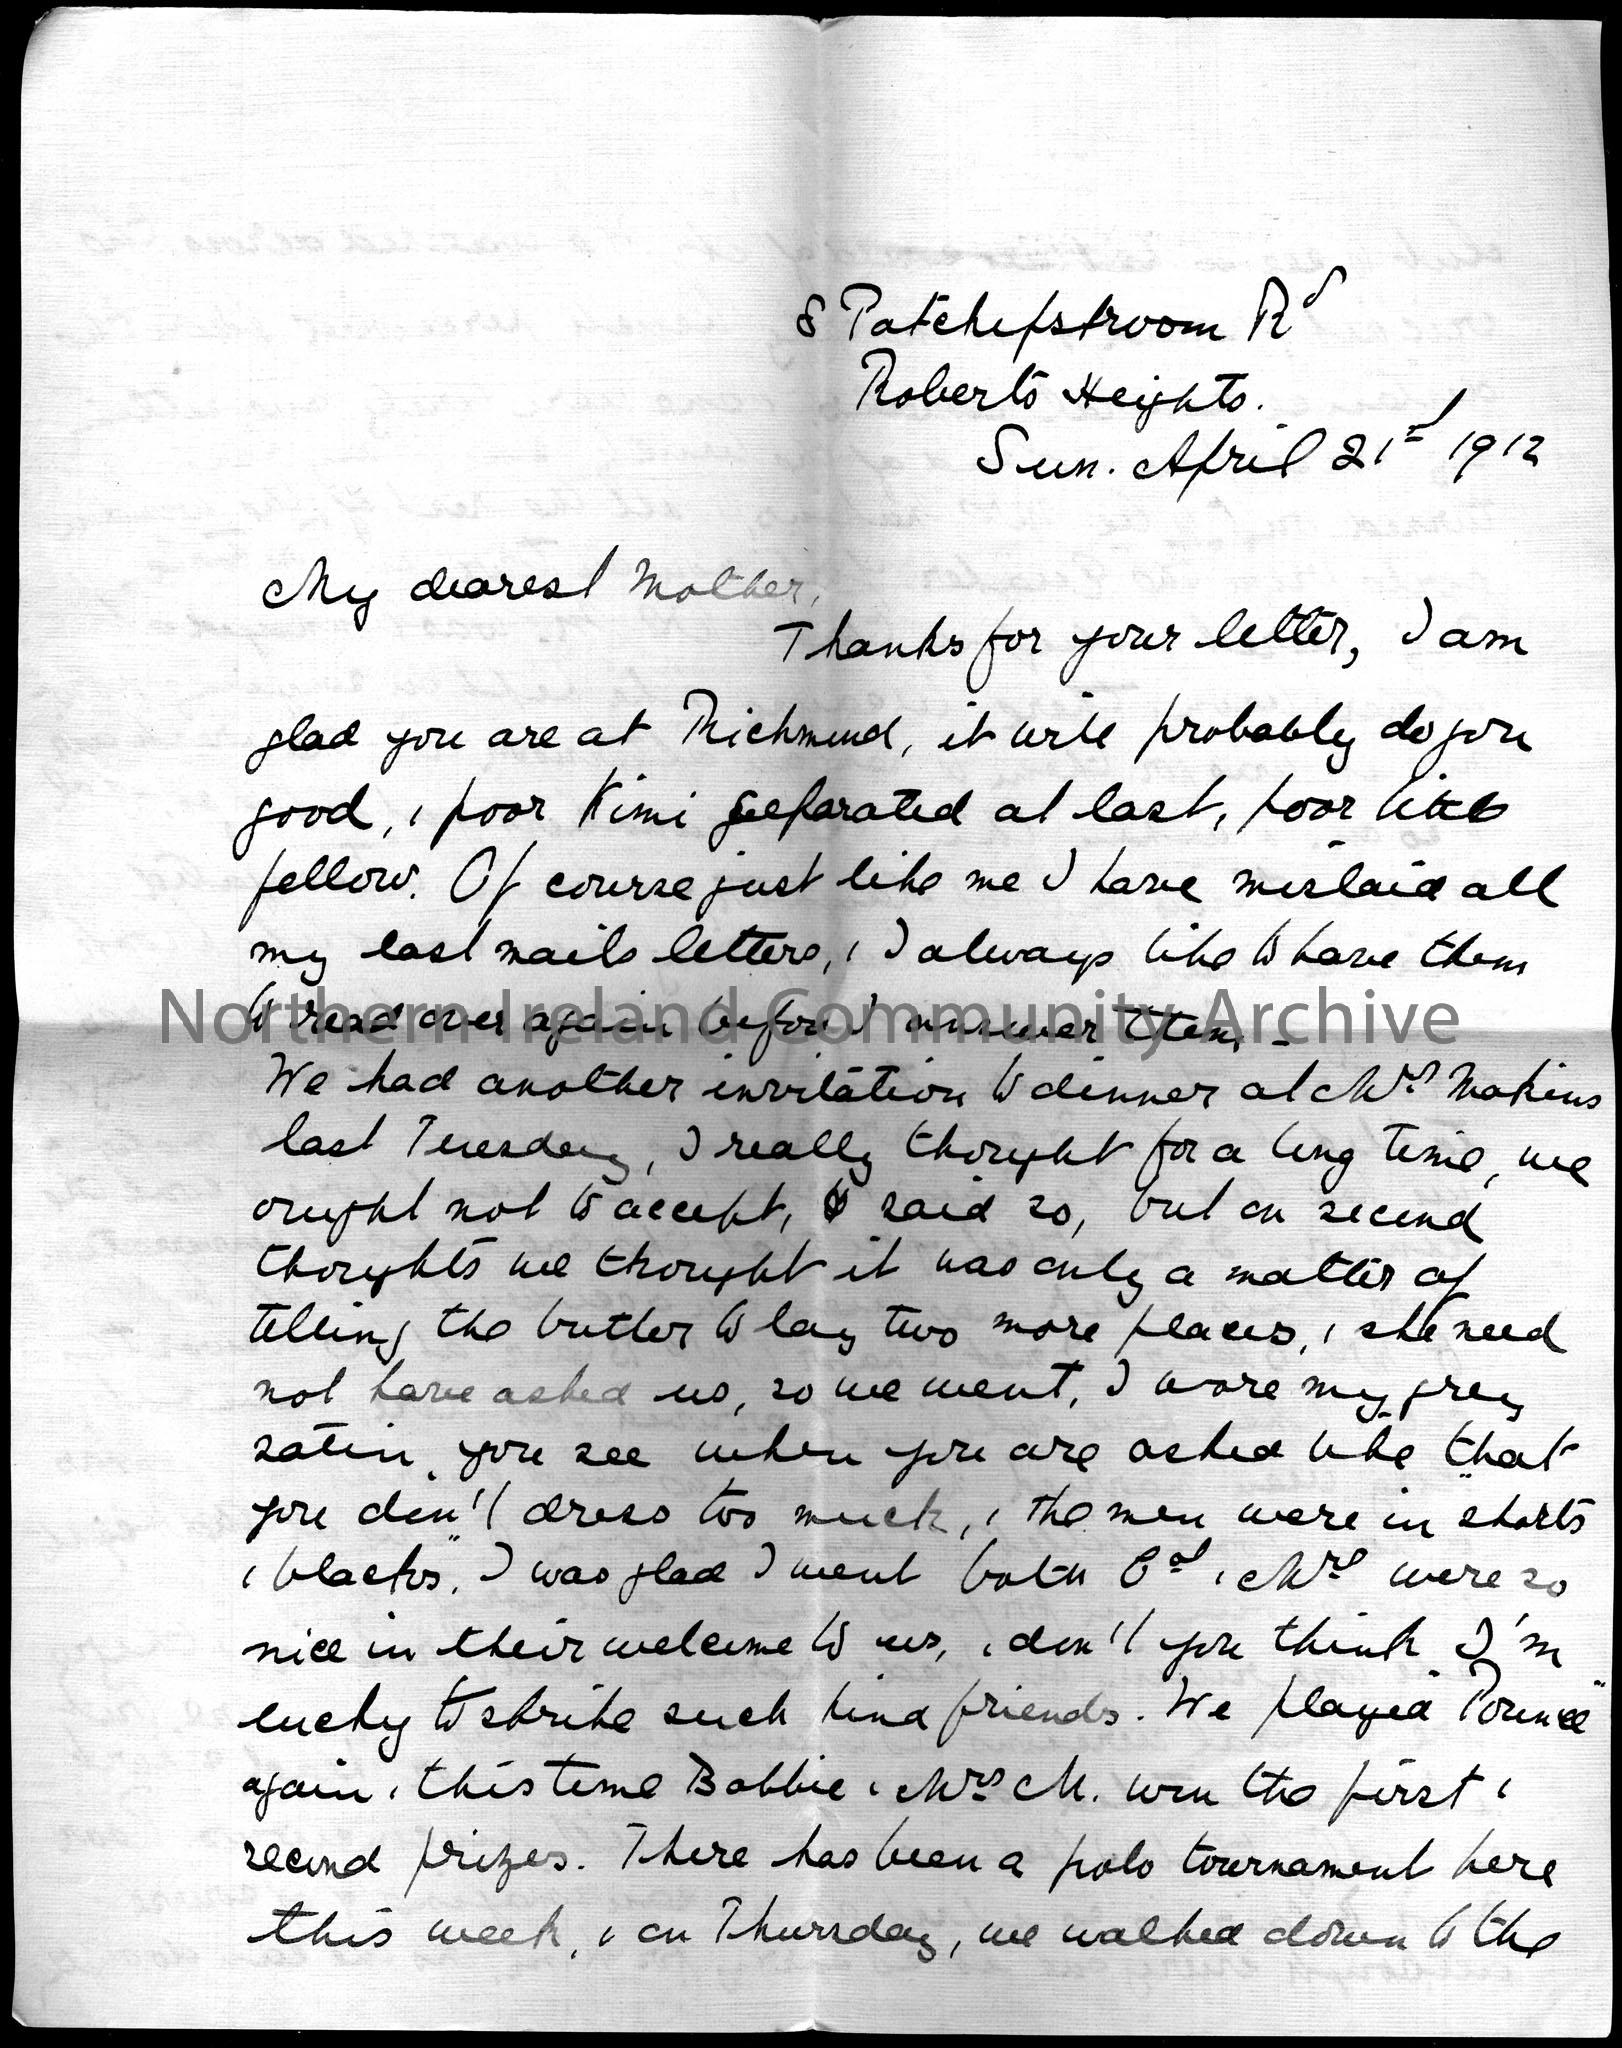 letter from Dorothy Arter Hezlet to her mother from Pretoria, Roberts Heights, dated Sun April 21st 1912. Dorothy writes that her mother is currently … – CM.2014.1208.1 front